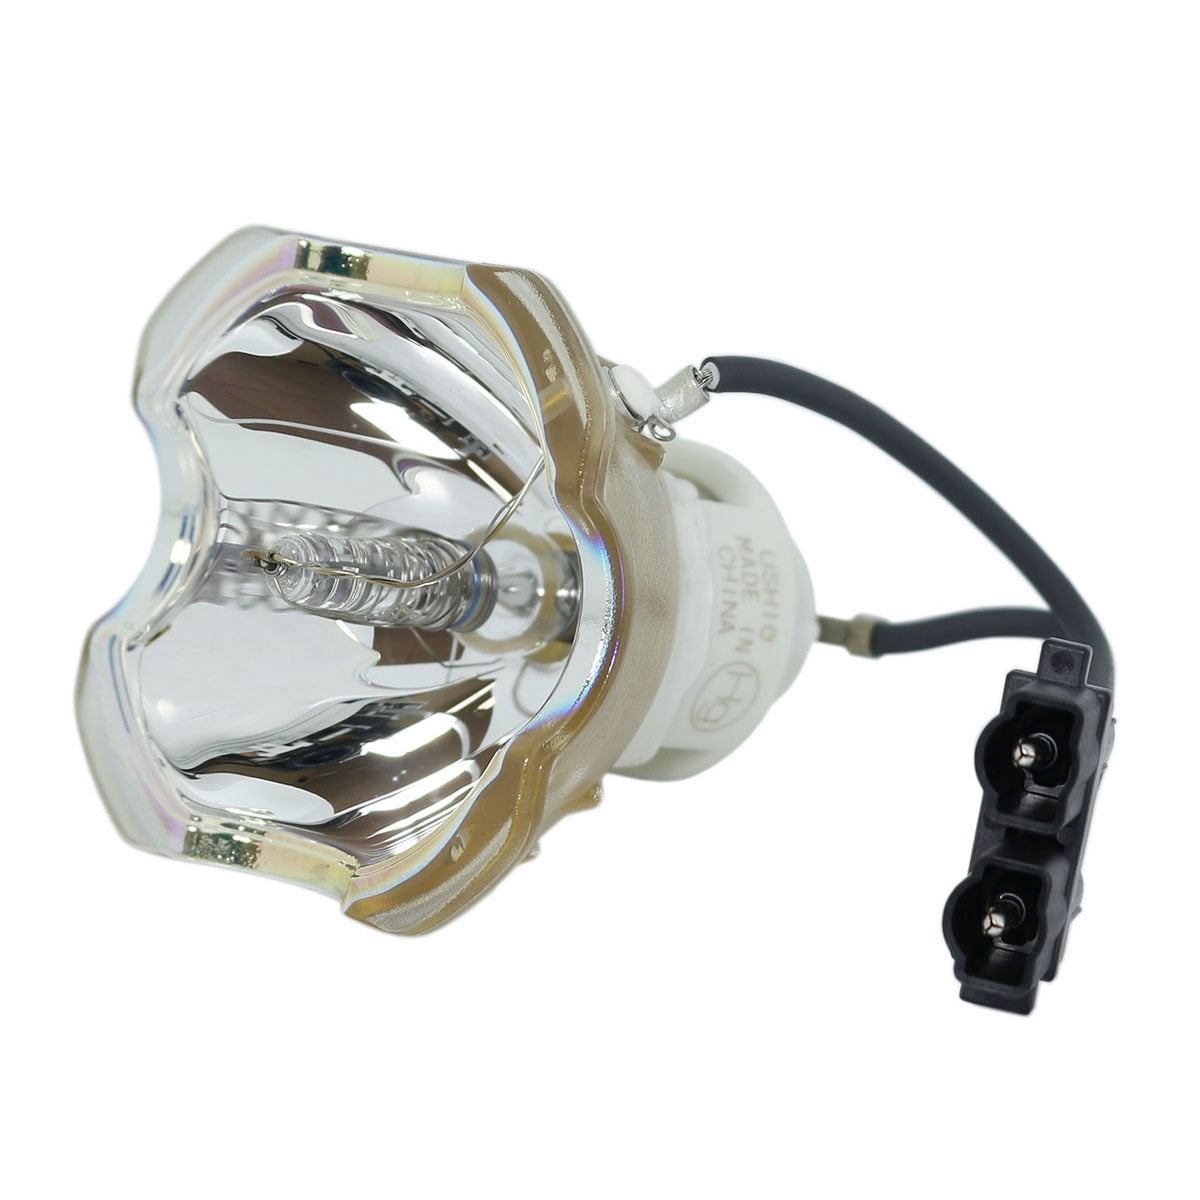 Bulb Only Original Ushio Projector Lamp Replacement for Viewsonic PJ1158 